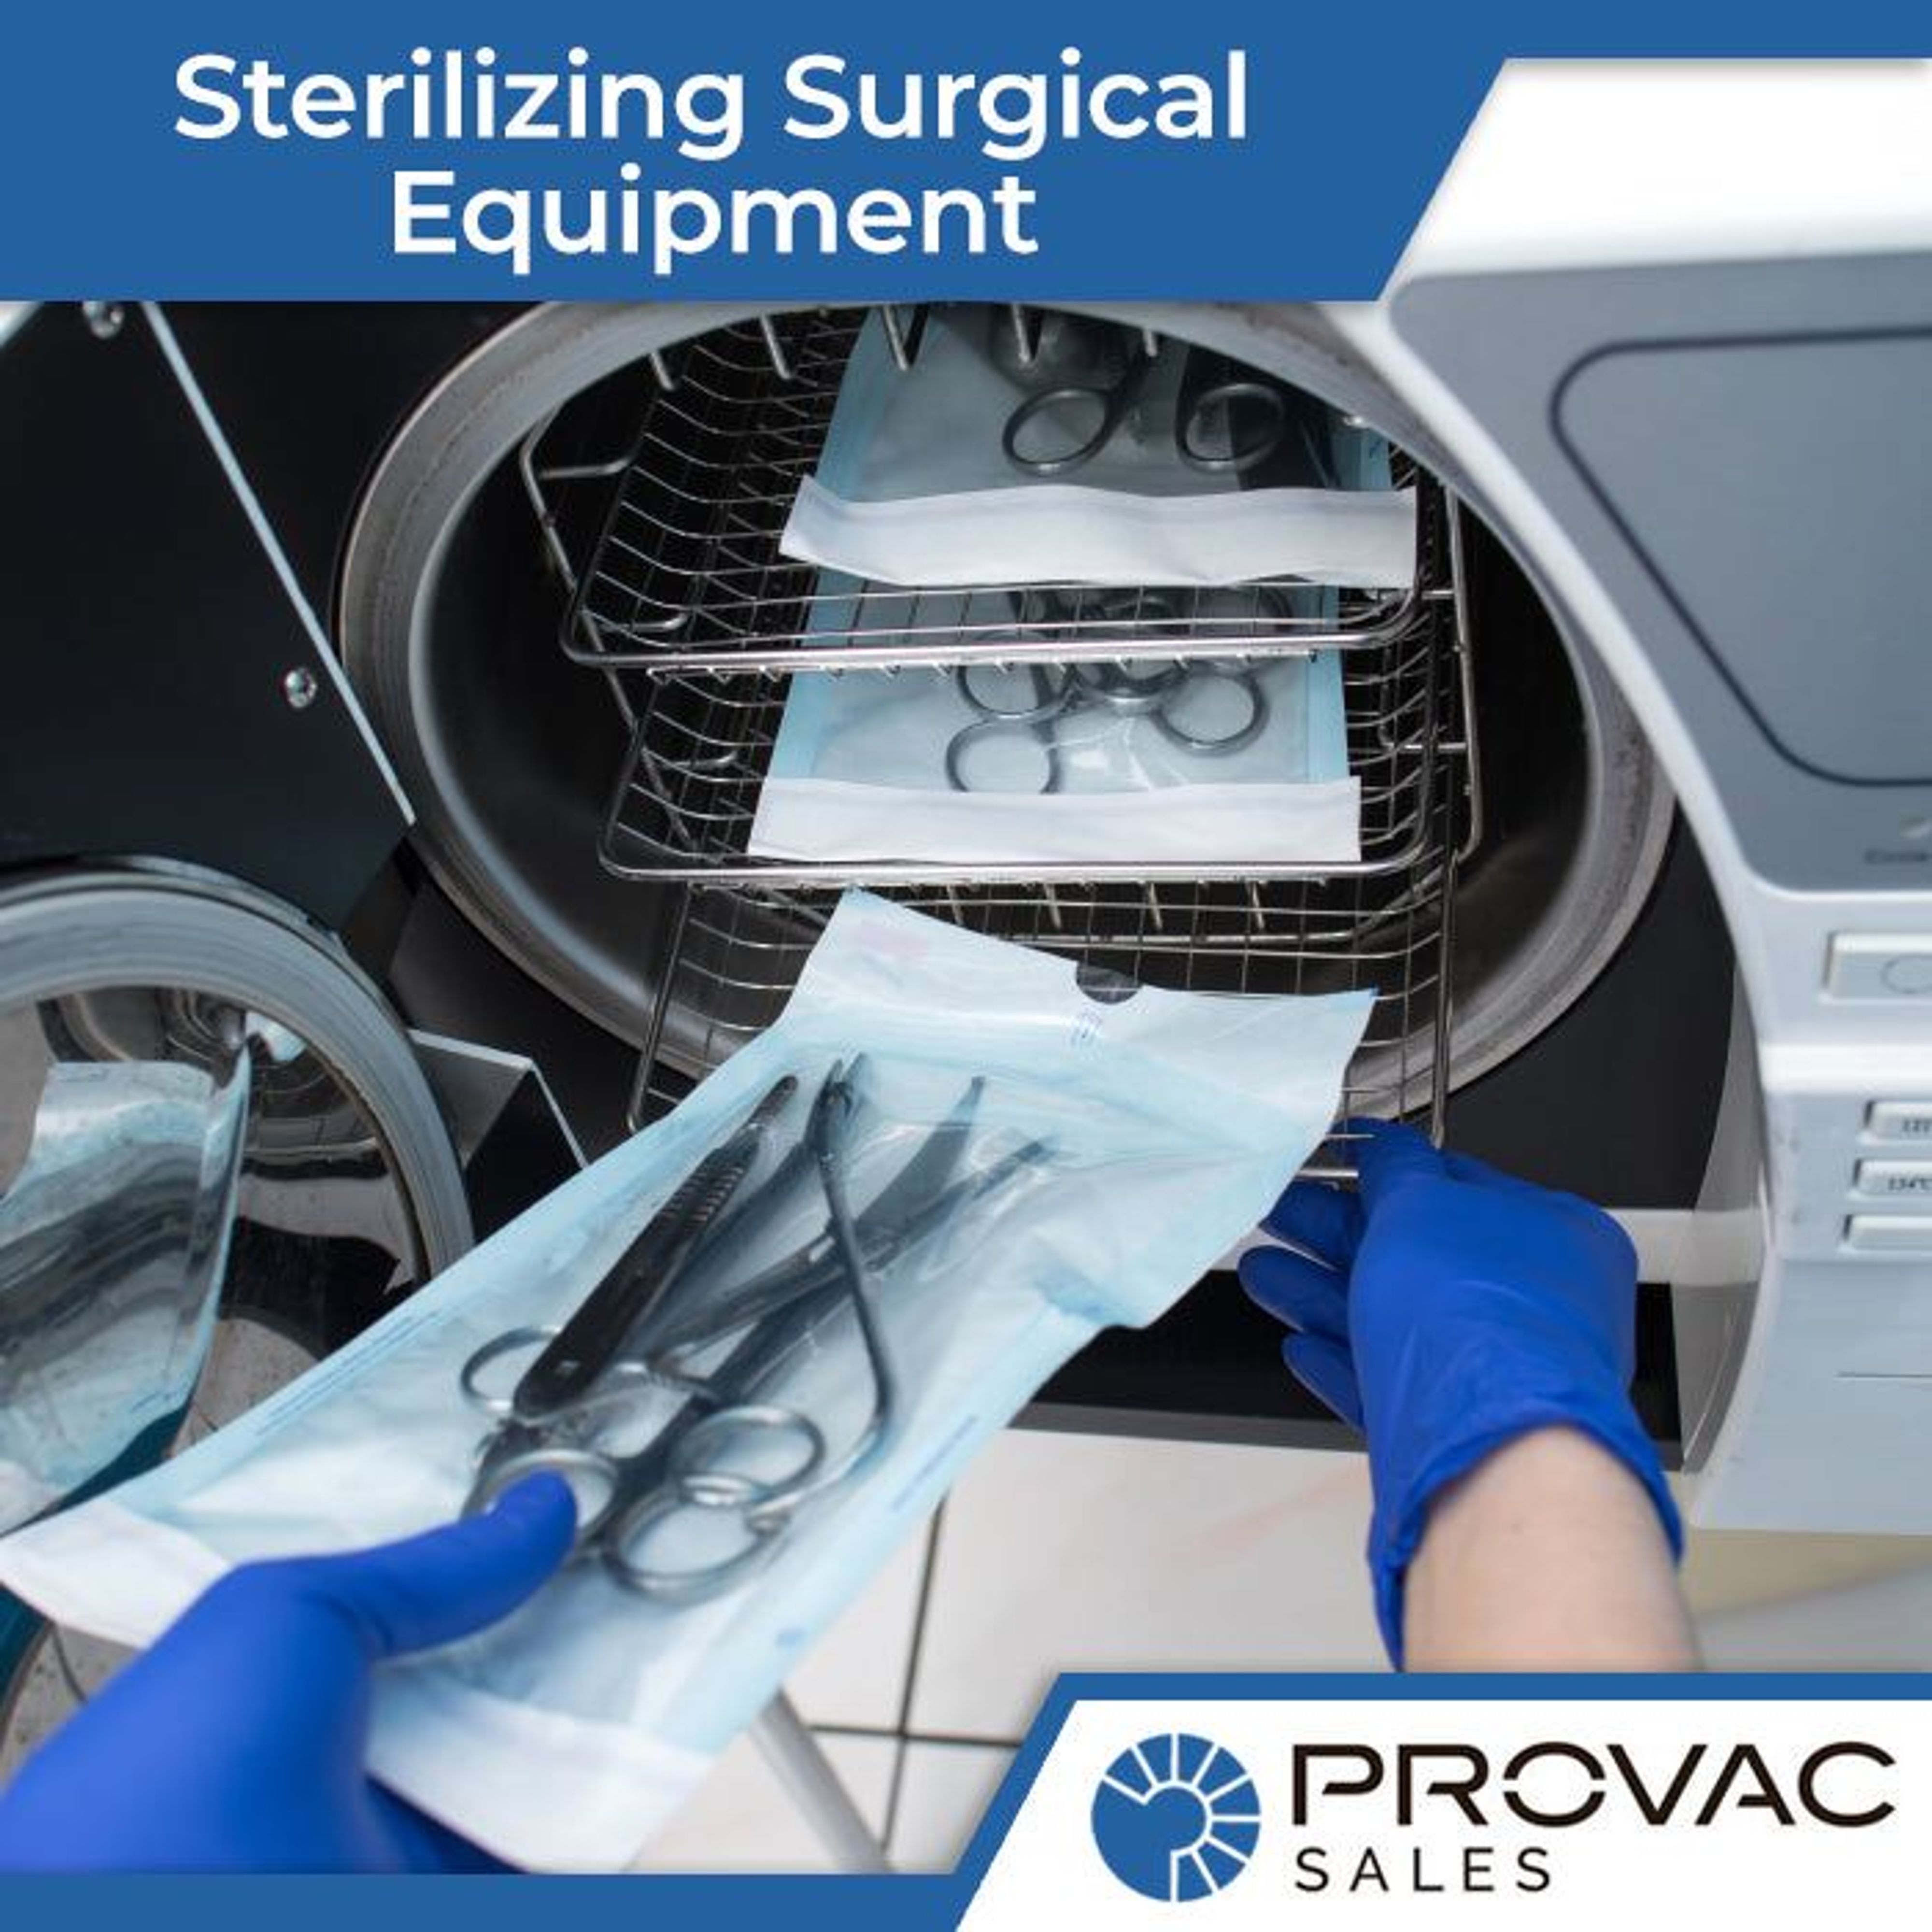 Sterilizing Surgical Equipment with Vacuum Pumps Background